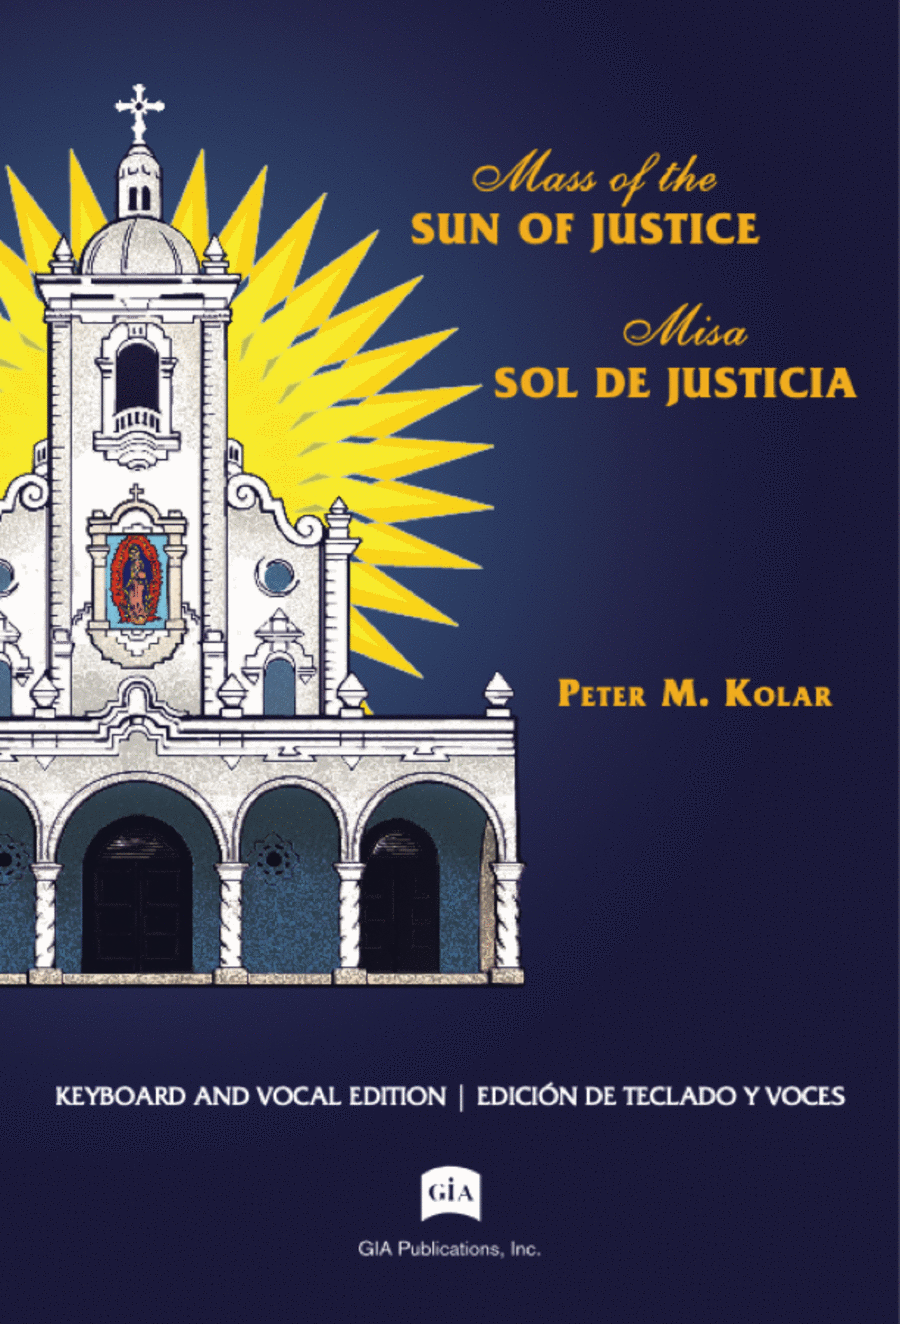 Mass of the Sun of Justice / Misa Sol de Justicia - Instrument edition